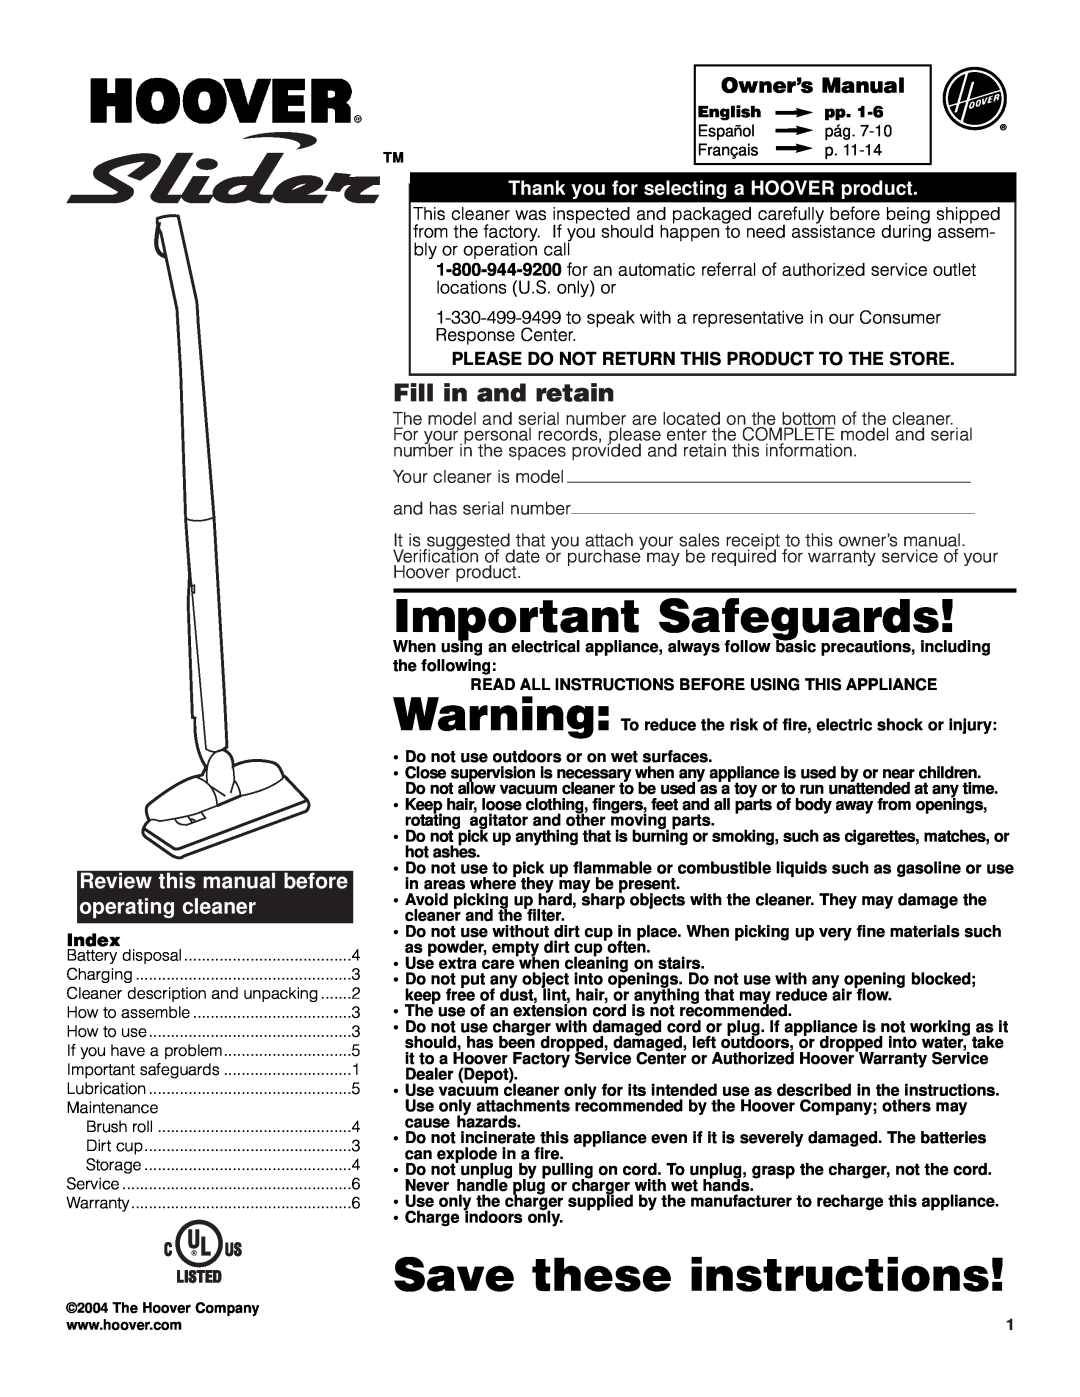 Hoover Slider Vacuum Cleaner owner manual Fill in and retain, Review this manual before operating cleaner, Owner’s Manual 